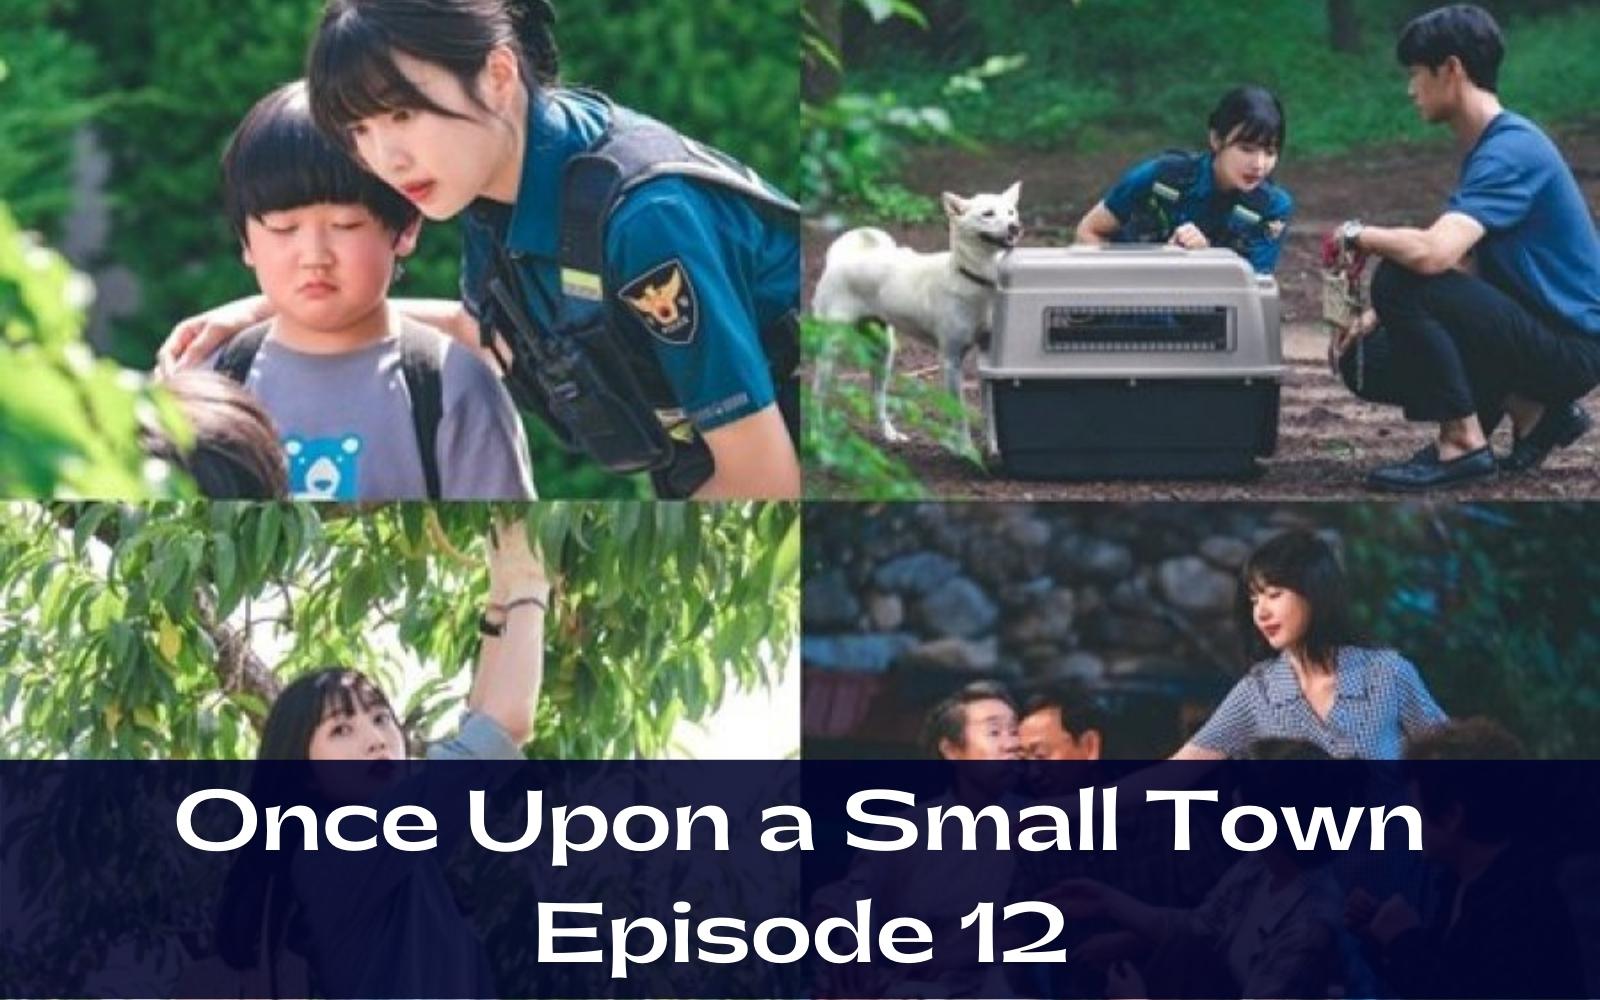 Once Upon a Small Town Episode 12 : Countdown, Release Date, Spoiler, Recap, Review & Where to Watch